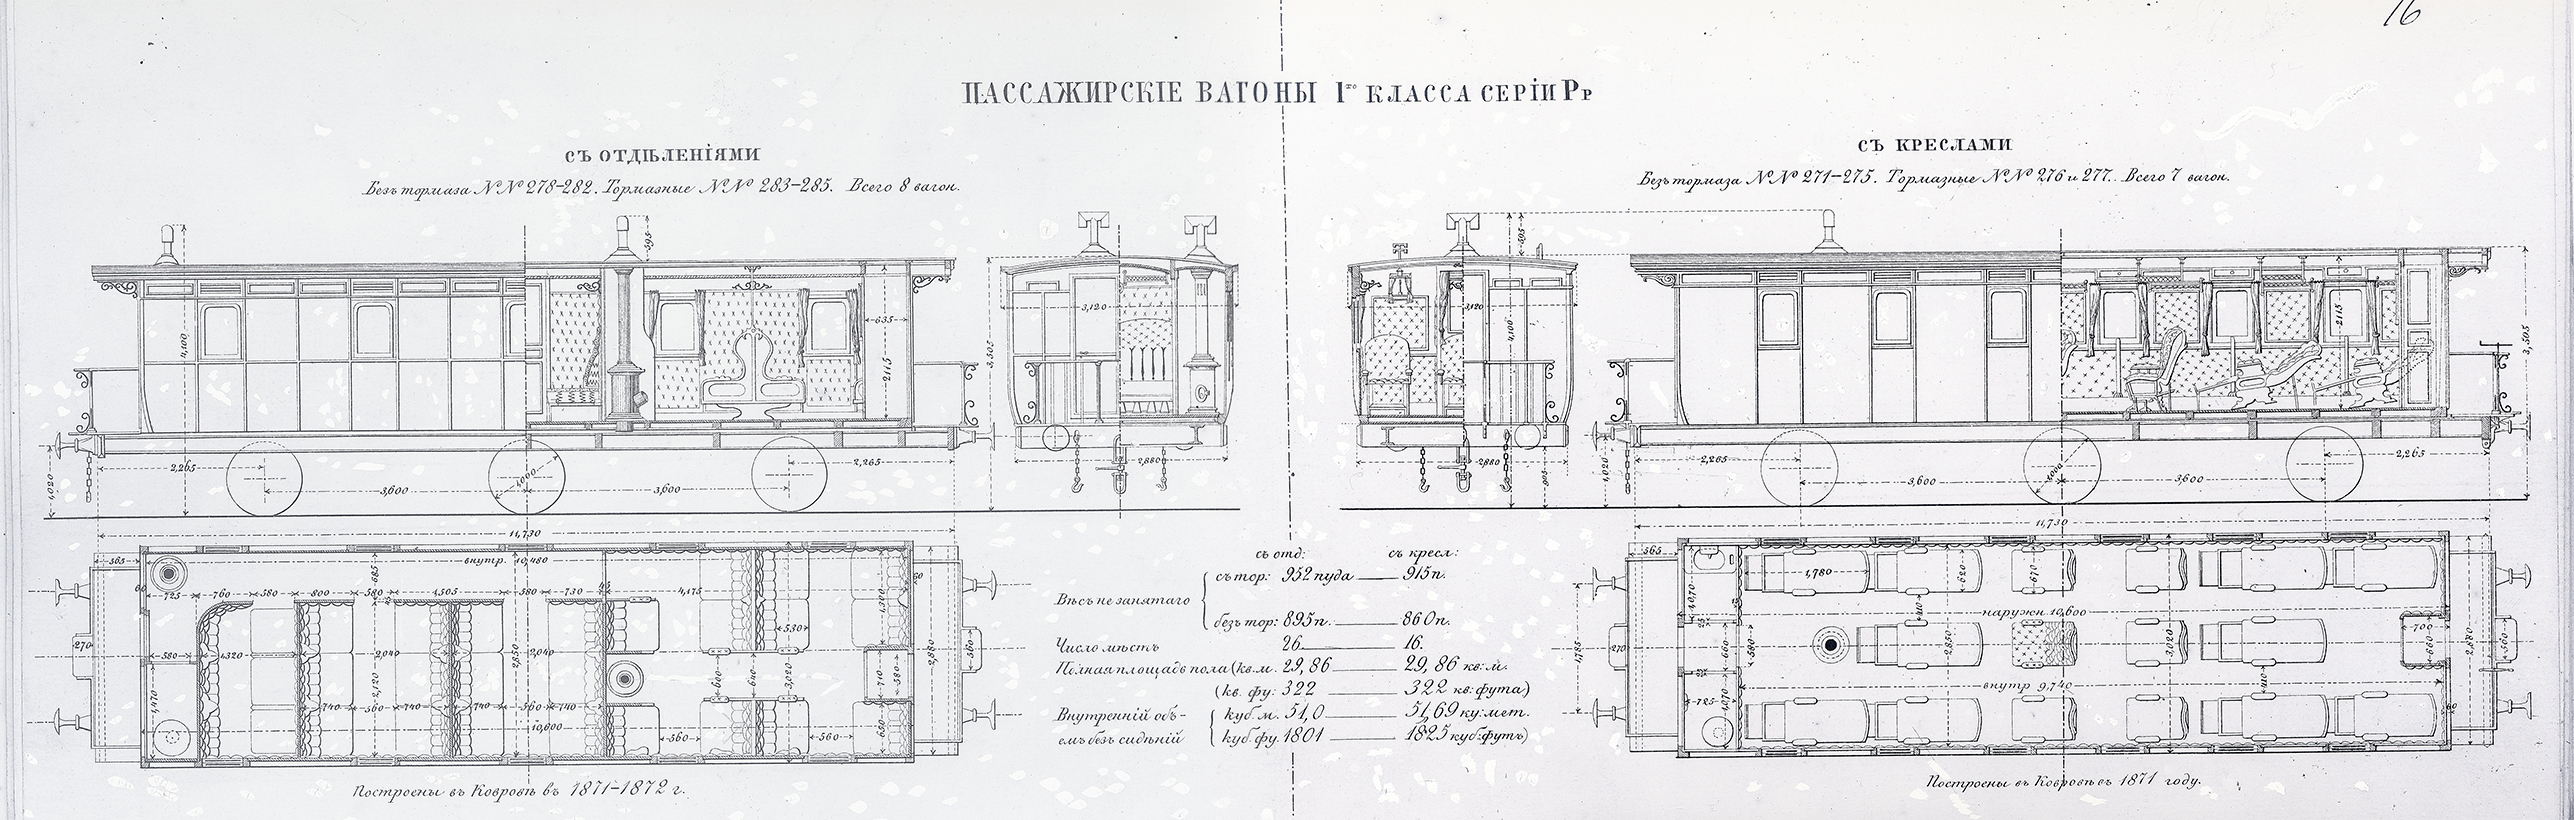 Passenger cars, first class, Series Rr; the layout of Anna’s car, manufactured at Kovrov (Vladimir Province) in 1871-72